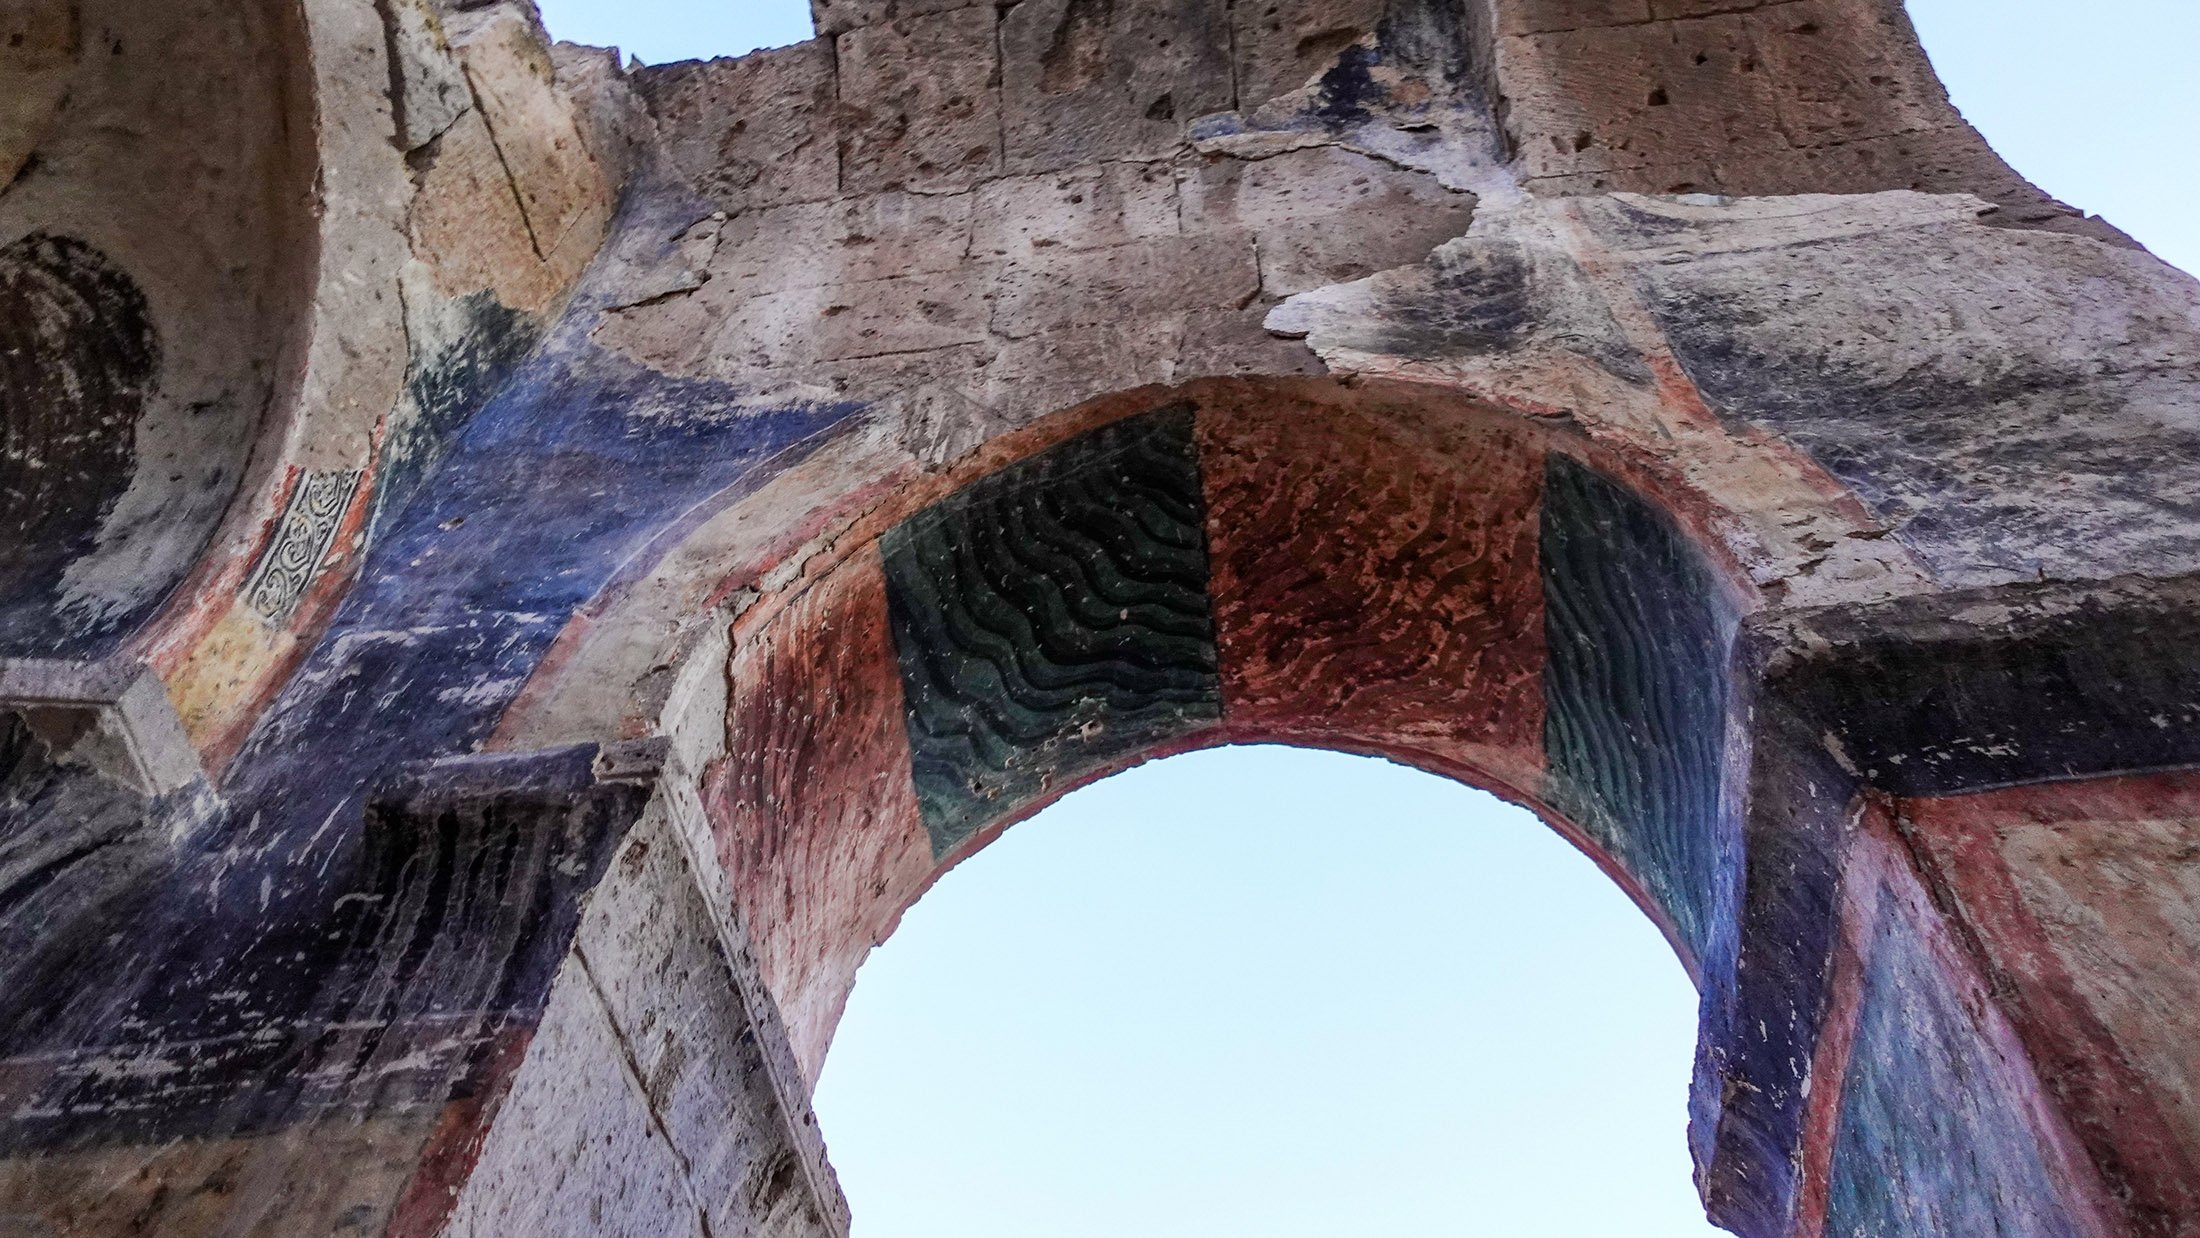 The eroded frescoes at the Bell Church. (Photo by Argun Konuk)